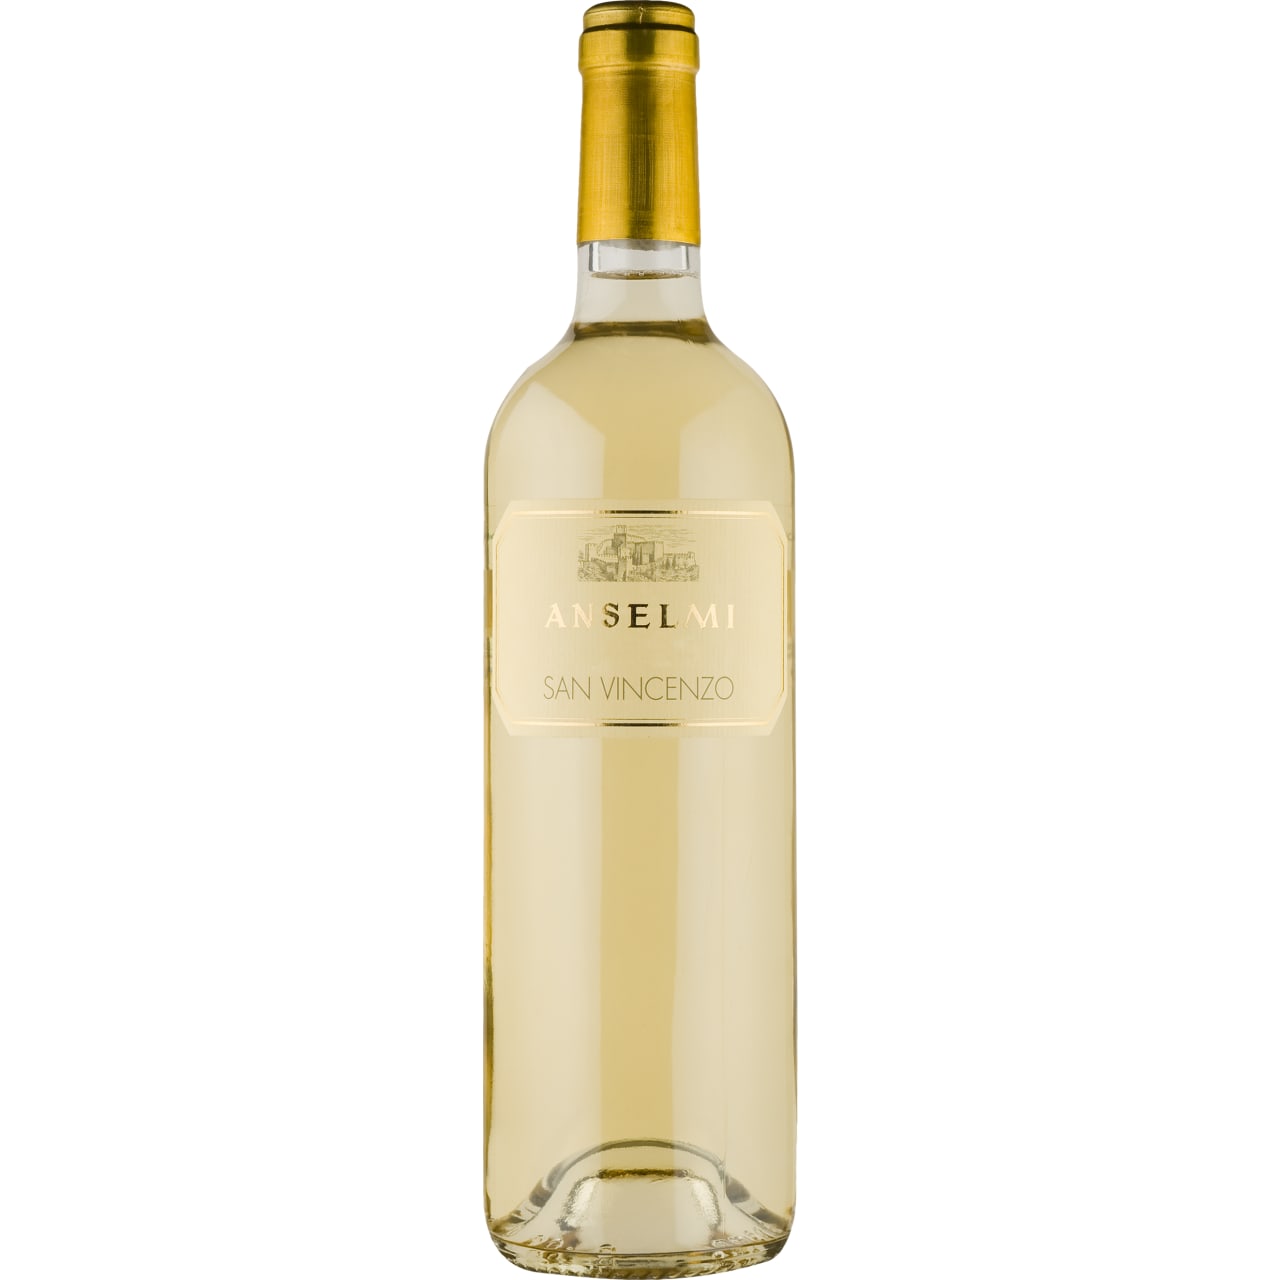 This aromatic white offers peaches, nuts and orange blossom on the nose with a refreshingly clean, crisp, unoaked palate.